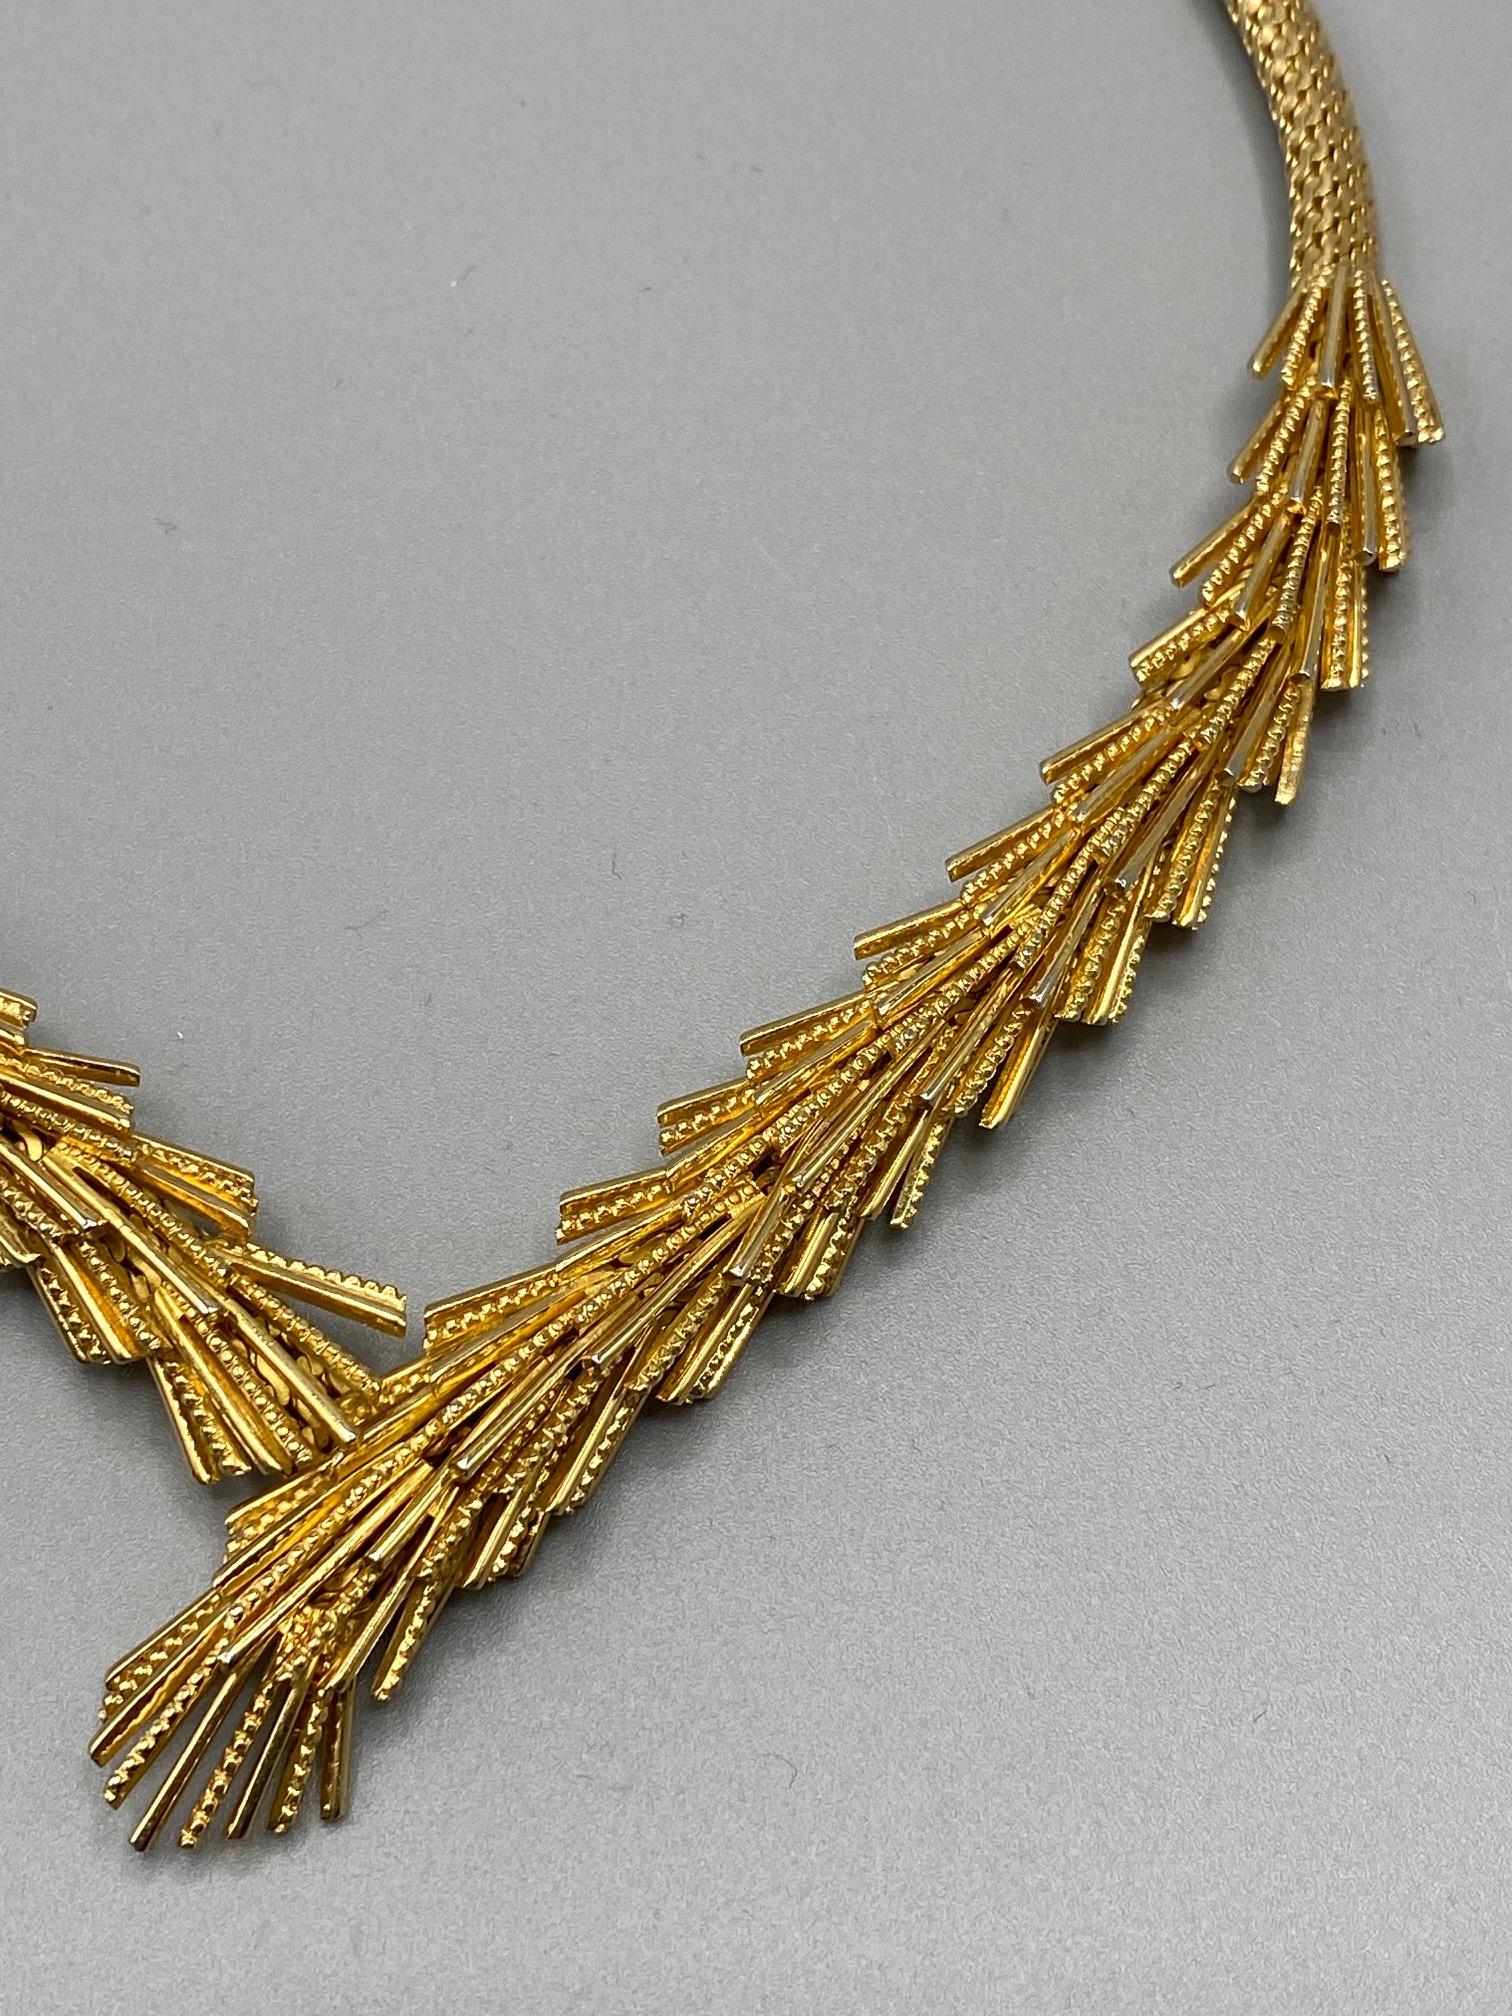 Women's or Men's Grosse Germany Gold Necklace from 1958